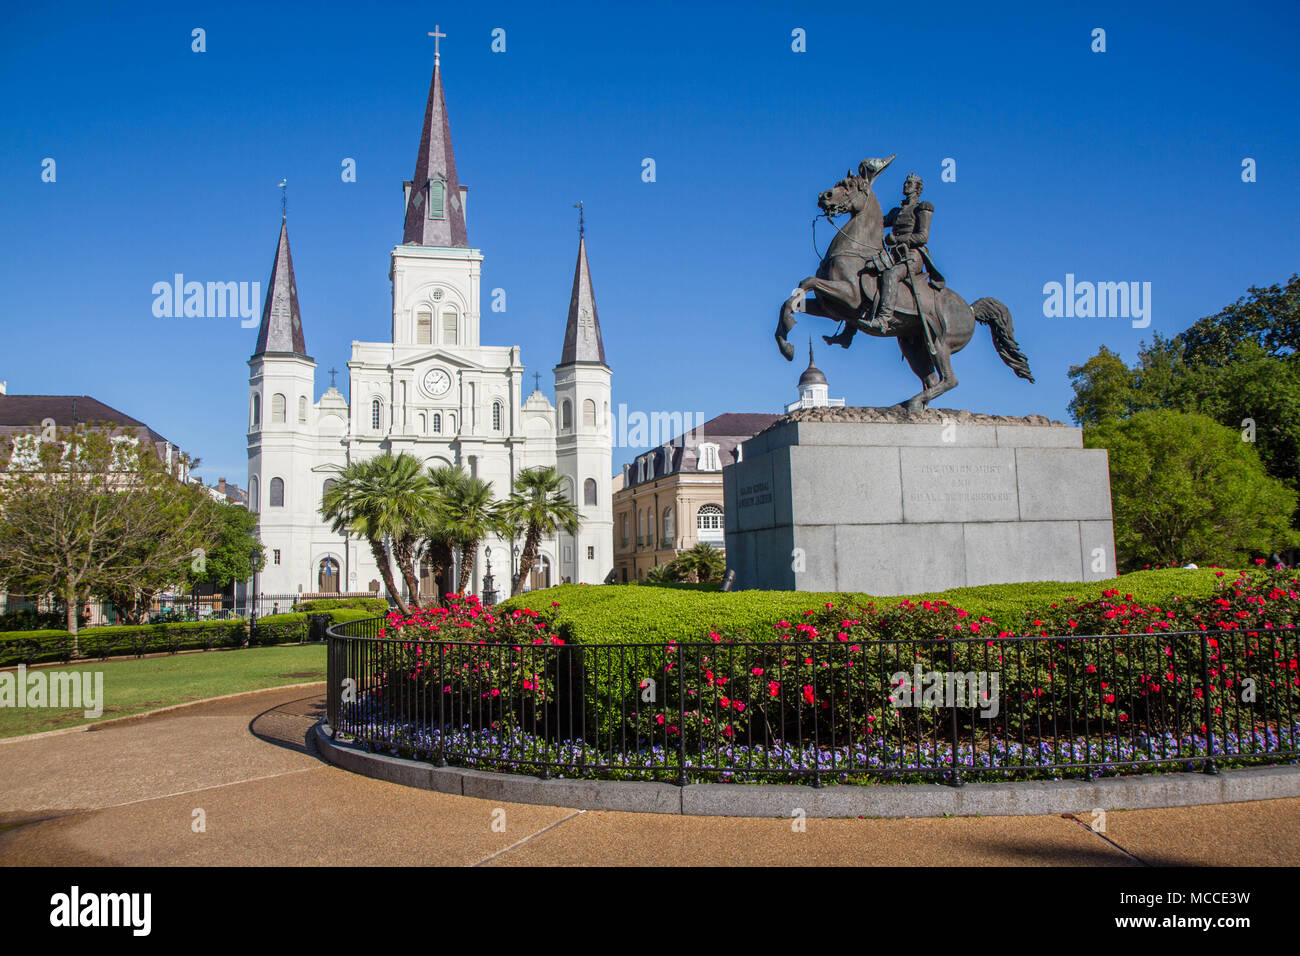 St. Louis Cathedral, Jackson Square, Louisiana, United States. Color horizontal image with Andrew Jackson statue in foreground with red flowers. Stock Photo